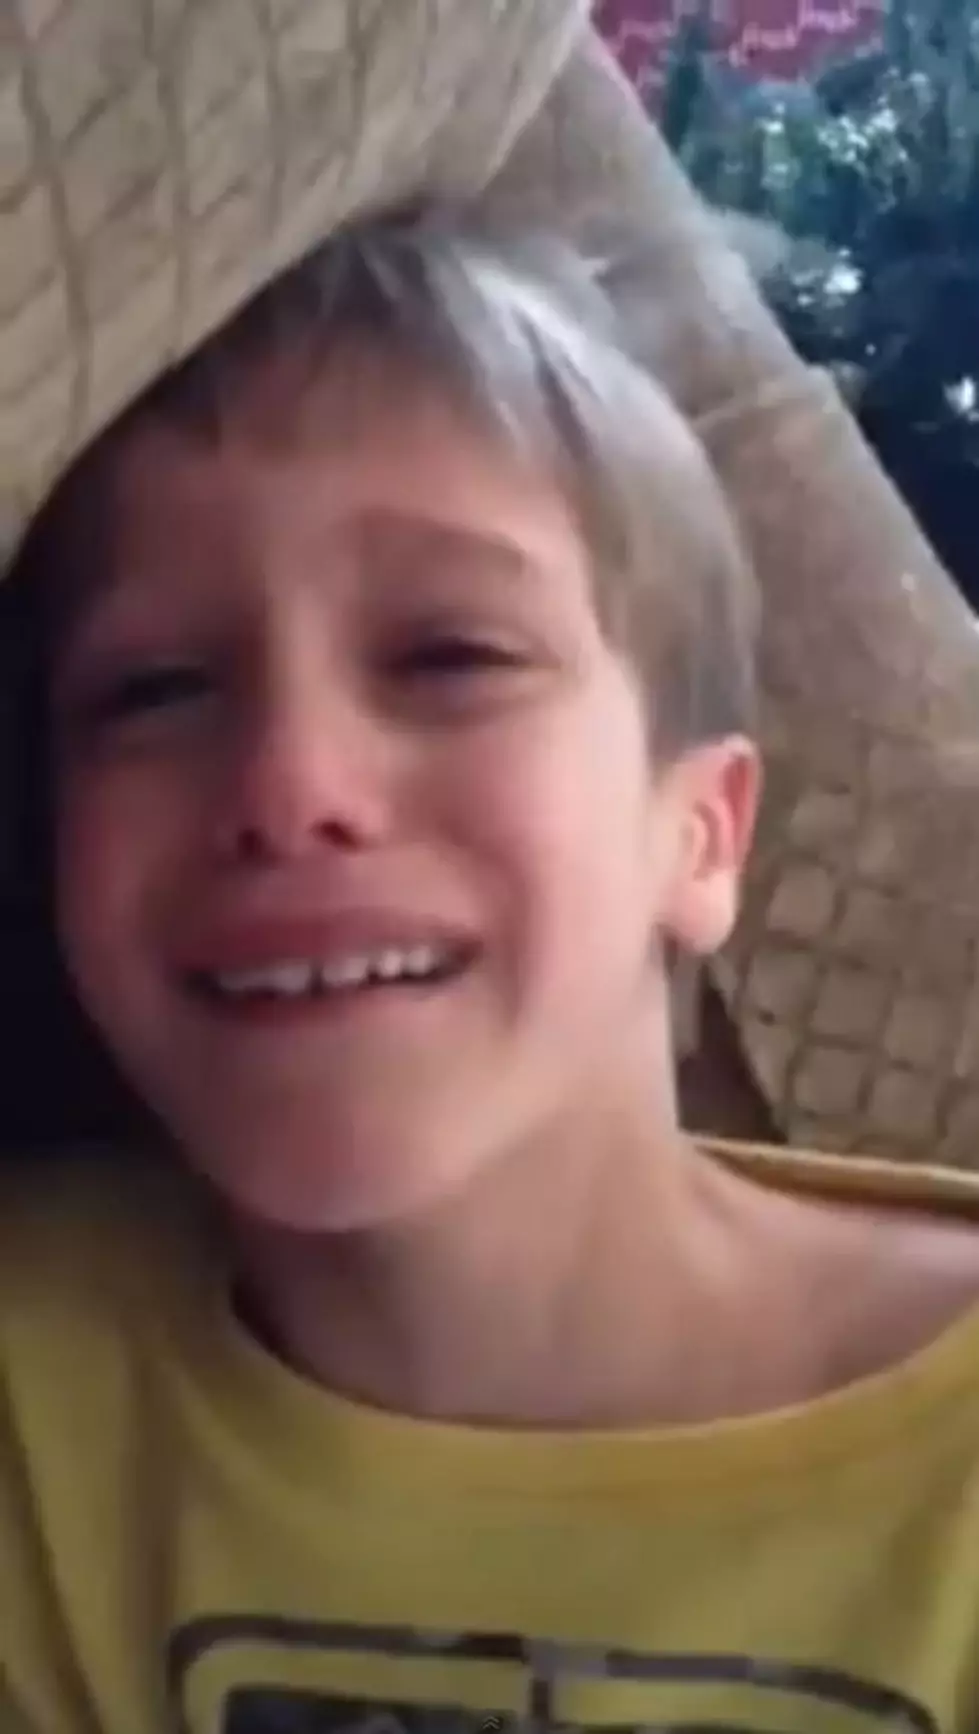 Mom Makes 8-Year-Old Cry [VIDEO]